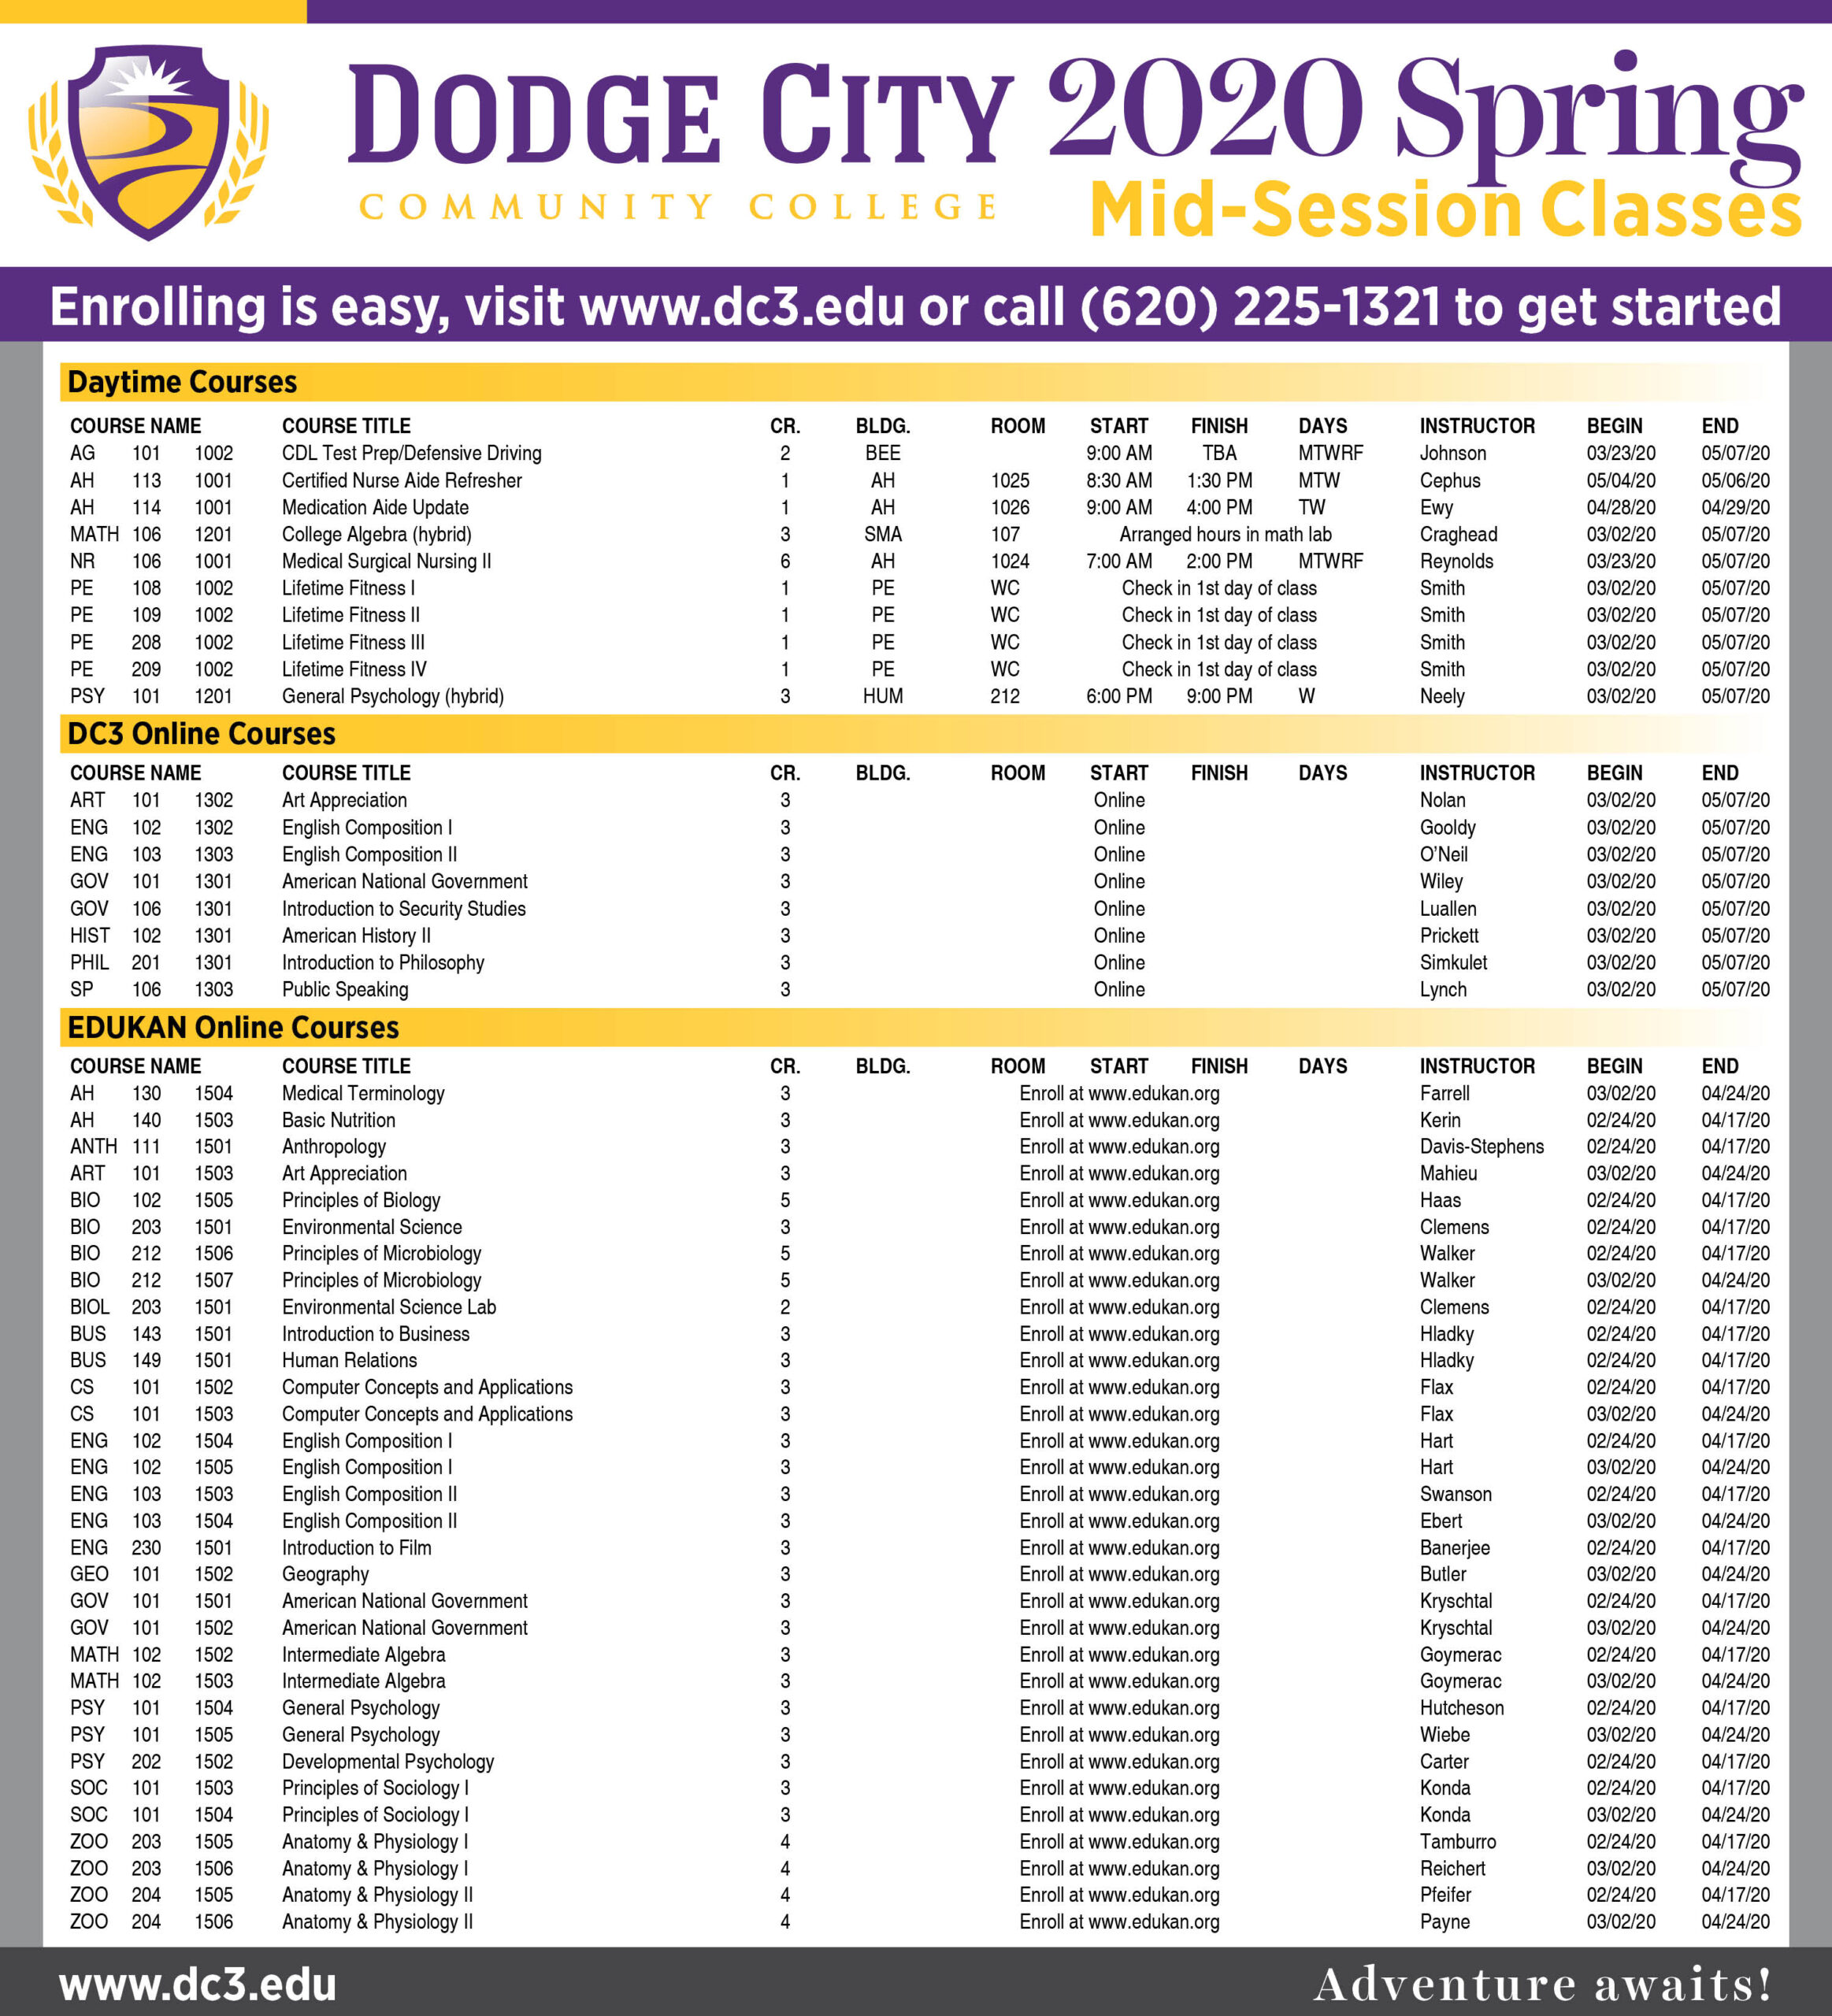 List of DC3's Mid-Session Classes offered in the 2020 Spring semester